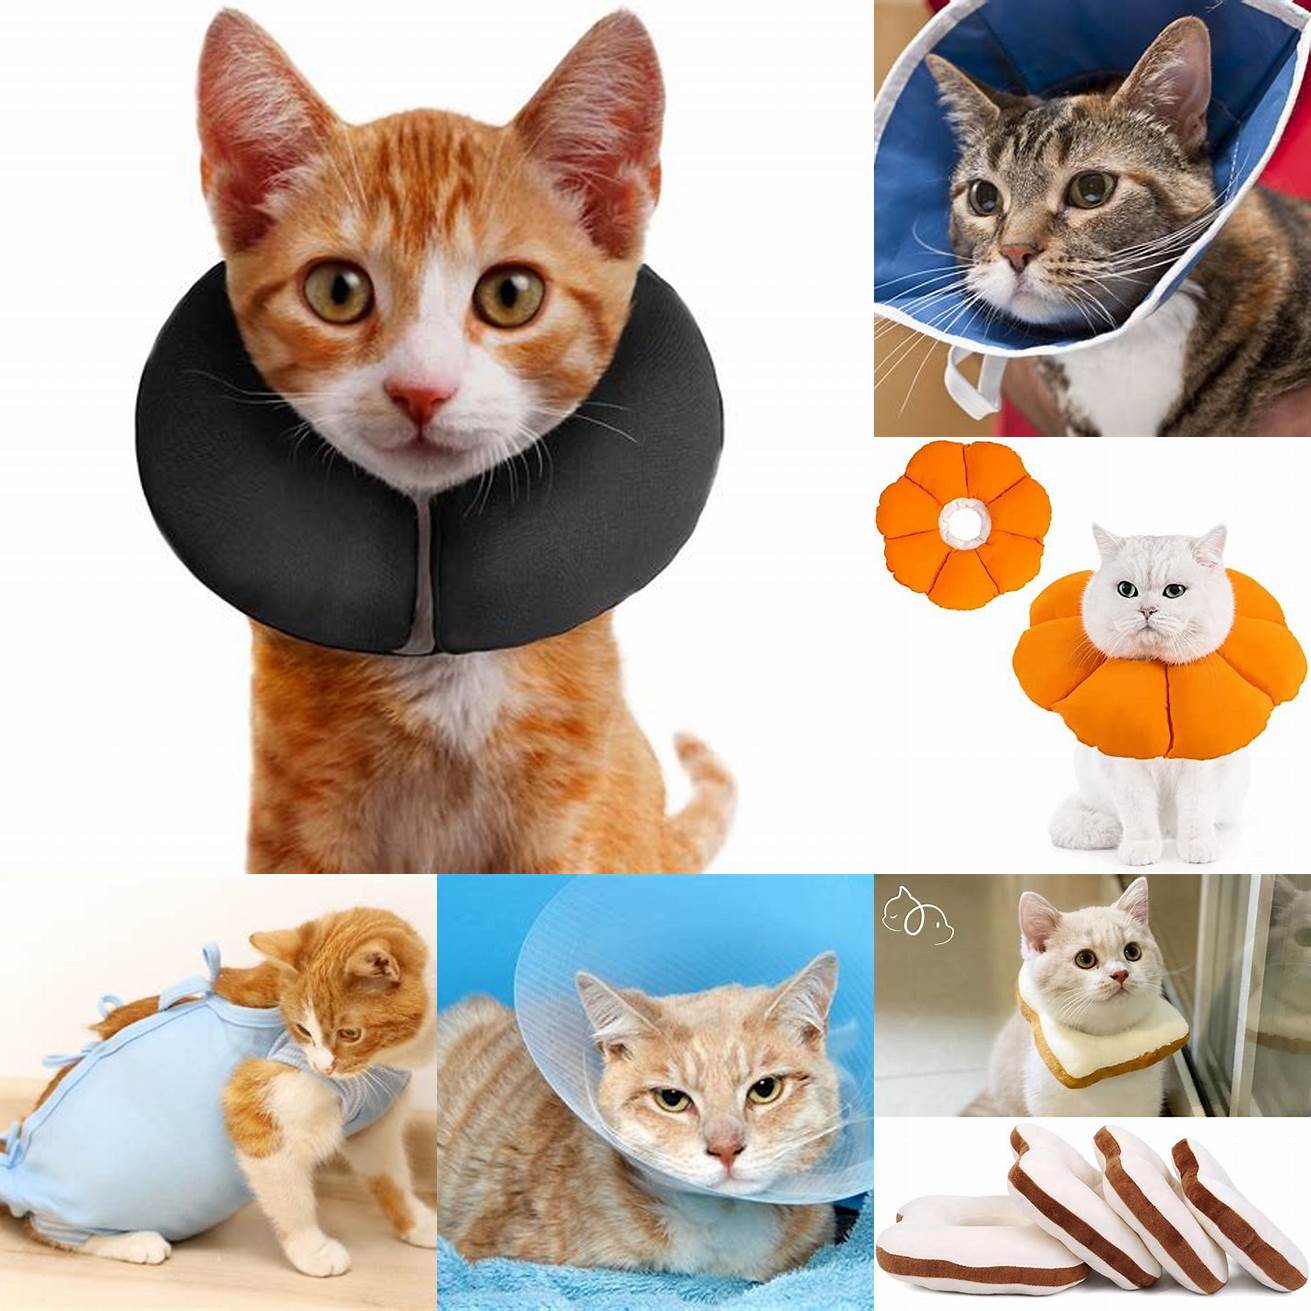 Prevent Licking - Use an Elizabethan collar or an alternative to prevent your cat from licking the wound